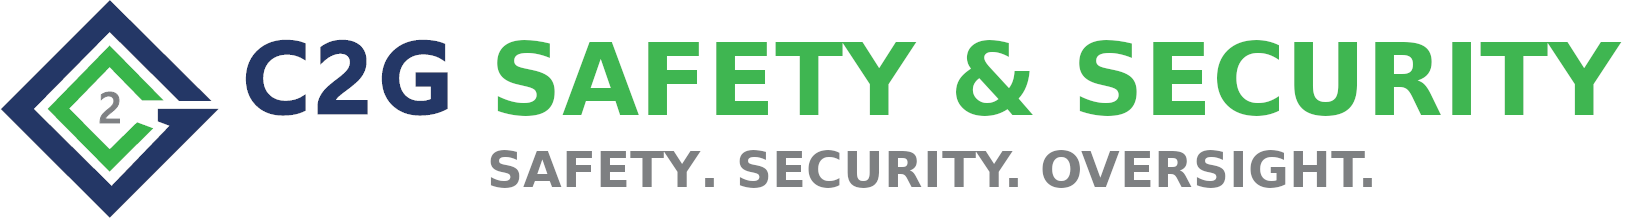 C2G Safety & Security